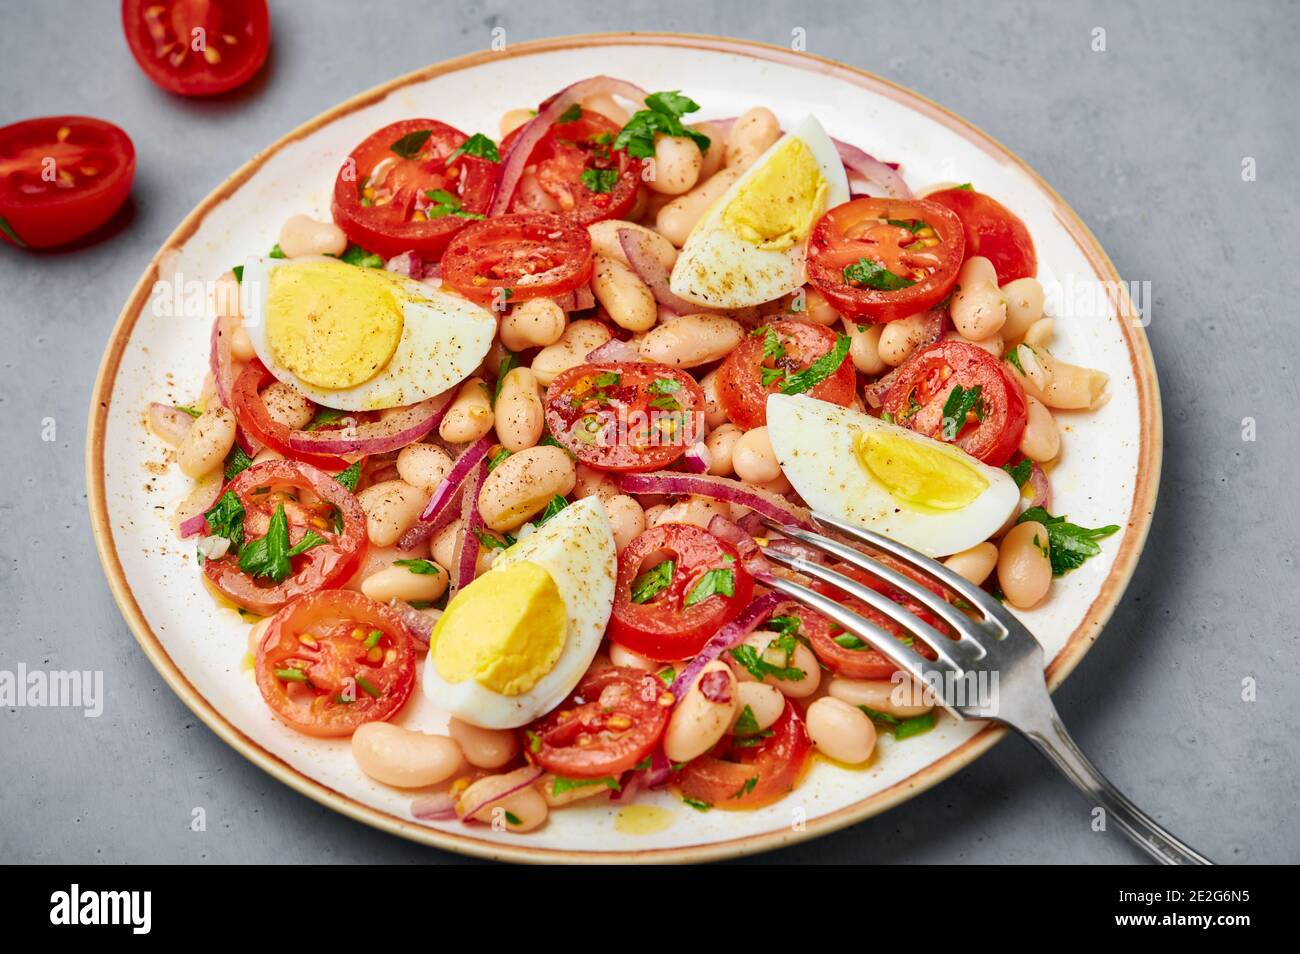 A Piyaz salad on white plate on gray concrete table top. Turkish cuisine vegetarian dish. Middle eastern cuisine food. Close up Stock Photo